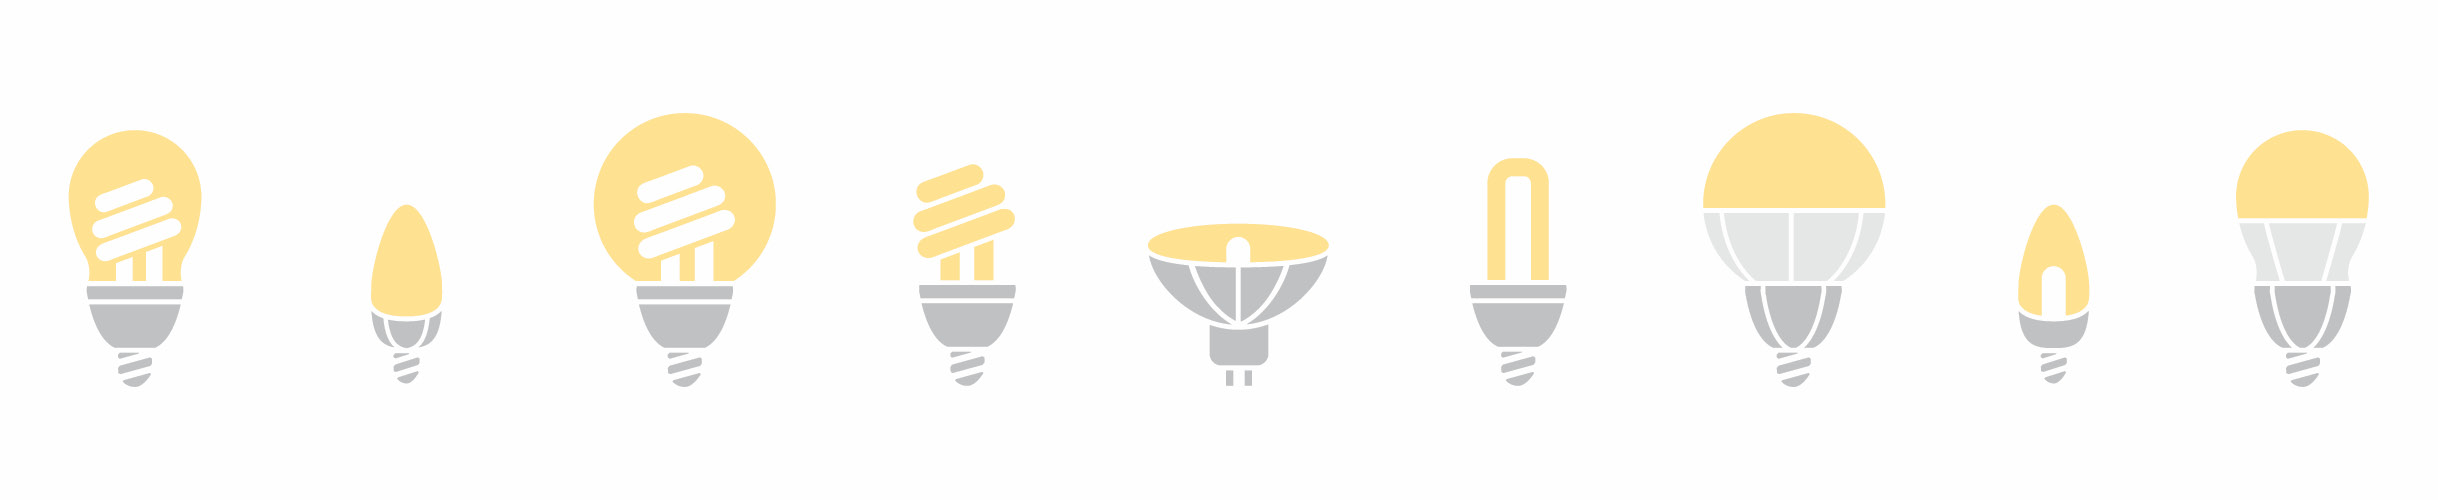 A series of nine grey and yellow light bulb icons depicting the nine sustainable bulb types in the promotional package.